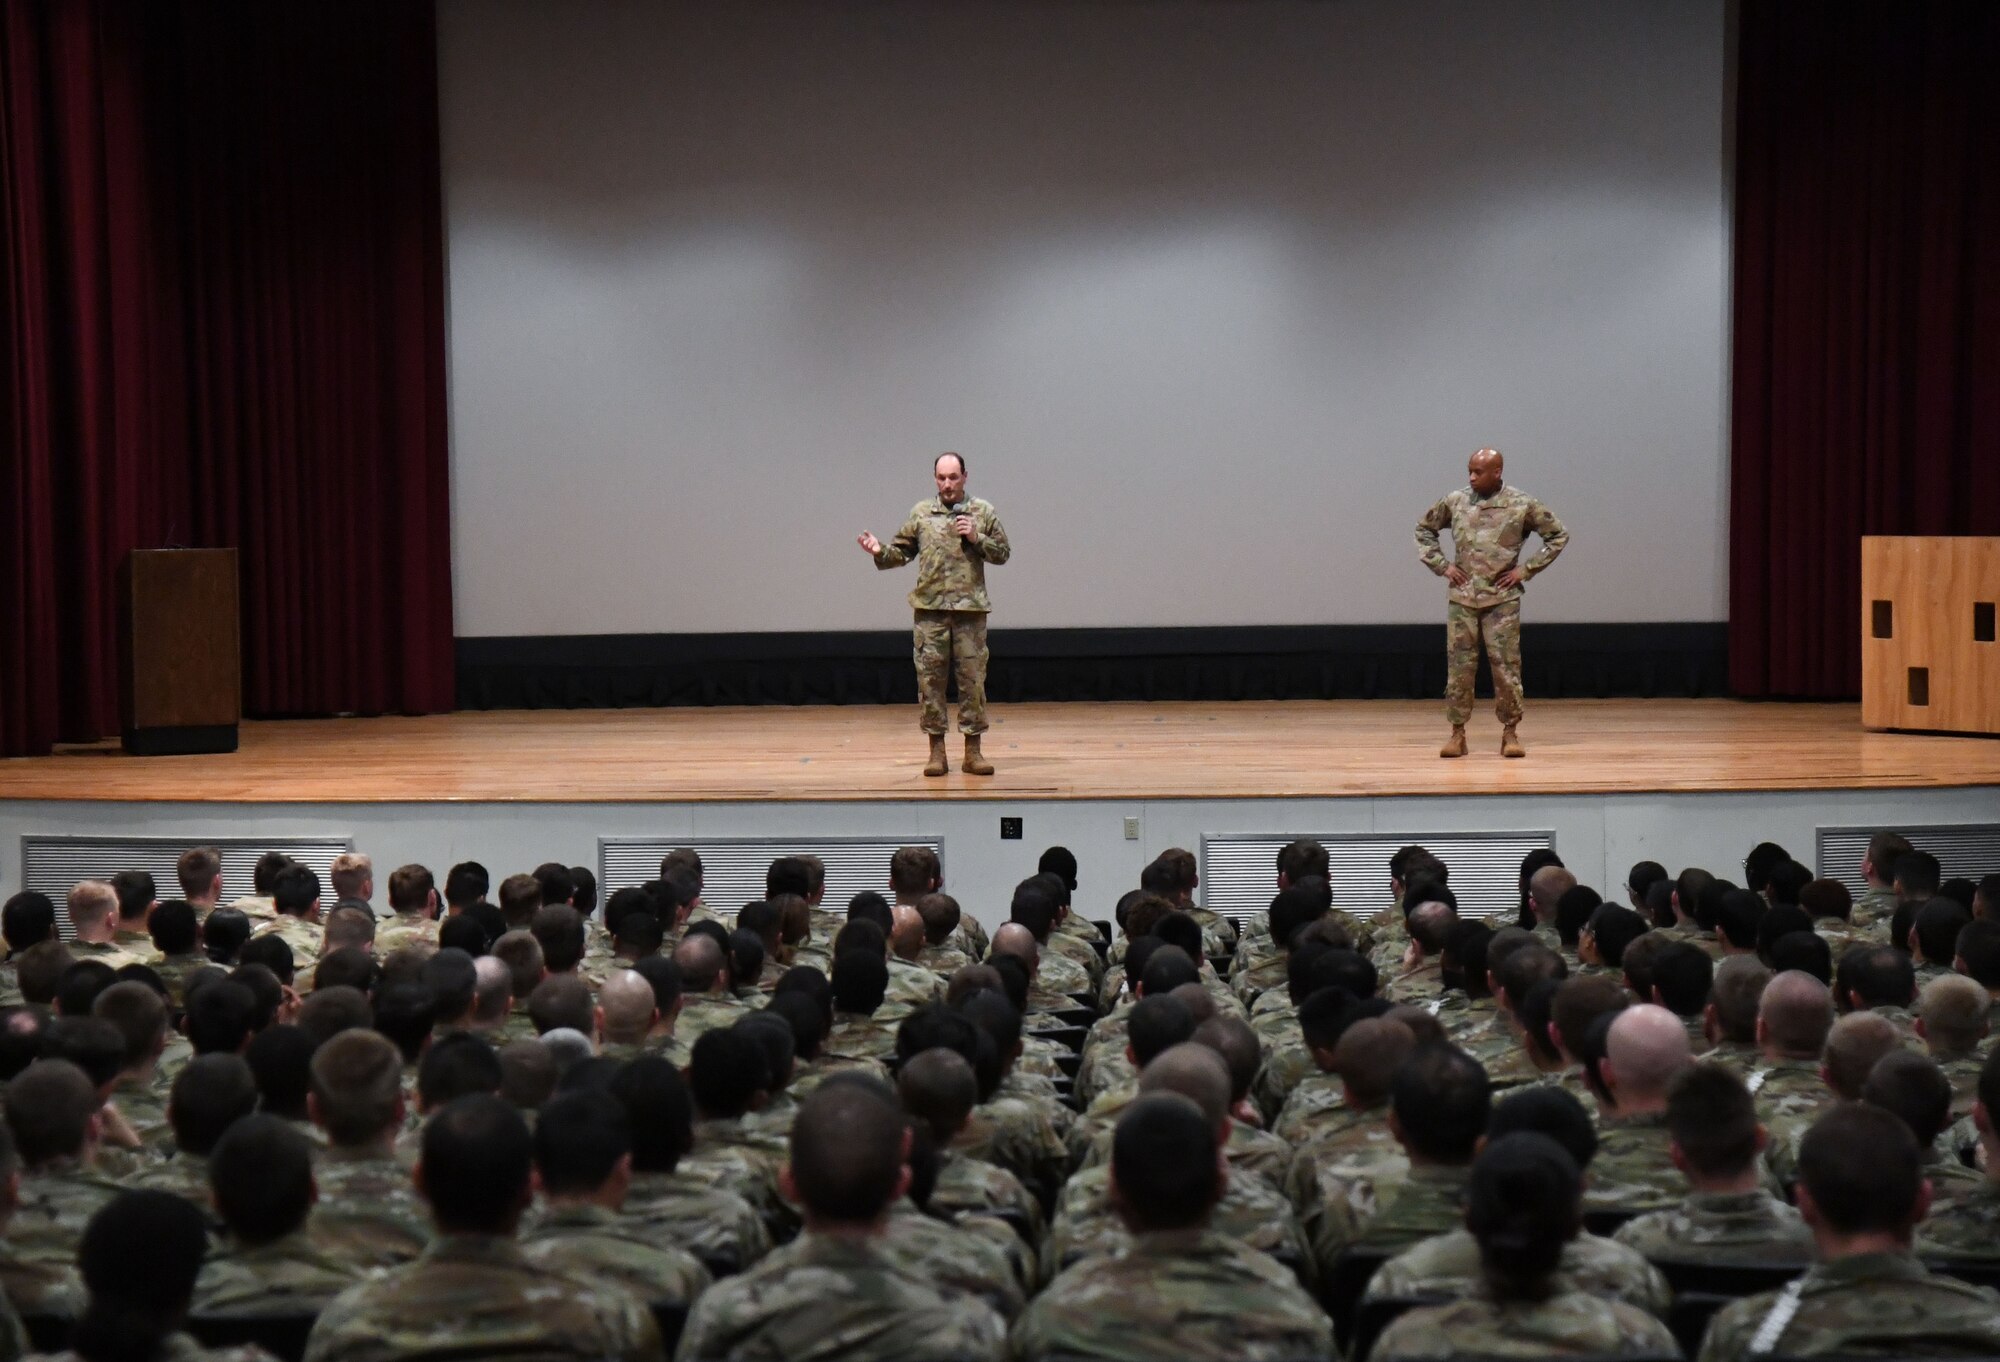 U.S. Air Force Lt. Gen. Kevin Kennedy, 16th Air Force commander, delivers remarks to cyber students as Chief Master Sgt. Keith Bruce, 16th AF command chief, stands by during an all call inside the Welch Theater at Keesler Air Force Base, Mississippi, March 22, 2023.